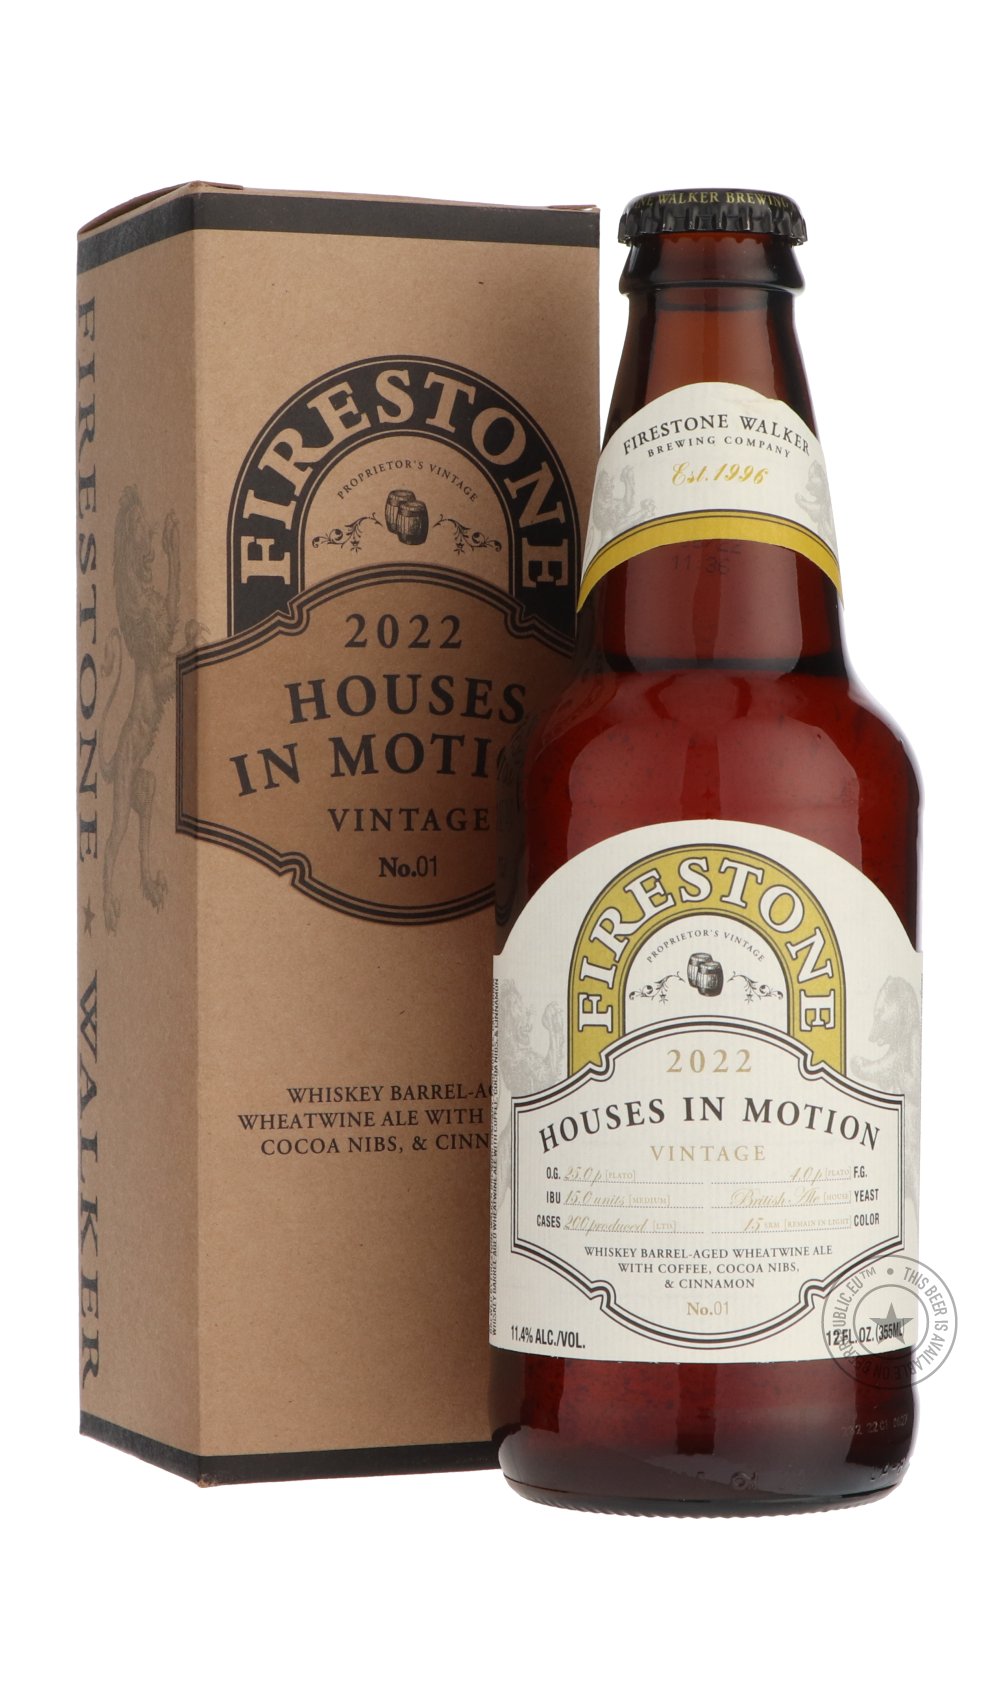 -Firestone Walker- Houses In Motion-Brown & Dark- Only @ Beer Republic - The best online beer store for American & Canadian craft beer - Buy beer online from the USA and Canada - Bier online kopen - Amerikaans bier kopen - Craft beer store - Craft beer kopen - Amerikanisch bier kaufen - Bier online kaufen - Acheter biere online - IPA - Stout - Porter - New England IPA - Hazy IPA - Imperial Stout - Barrel Aged - Barrel Aged Imperial Stout - Brown - Dark beer - Blond - Blonde - Pilsner - Lager - Wheat - Weize